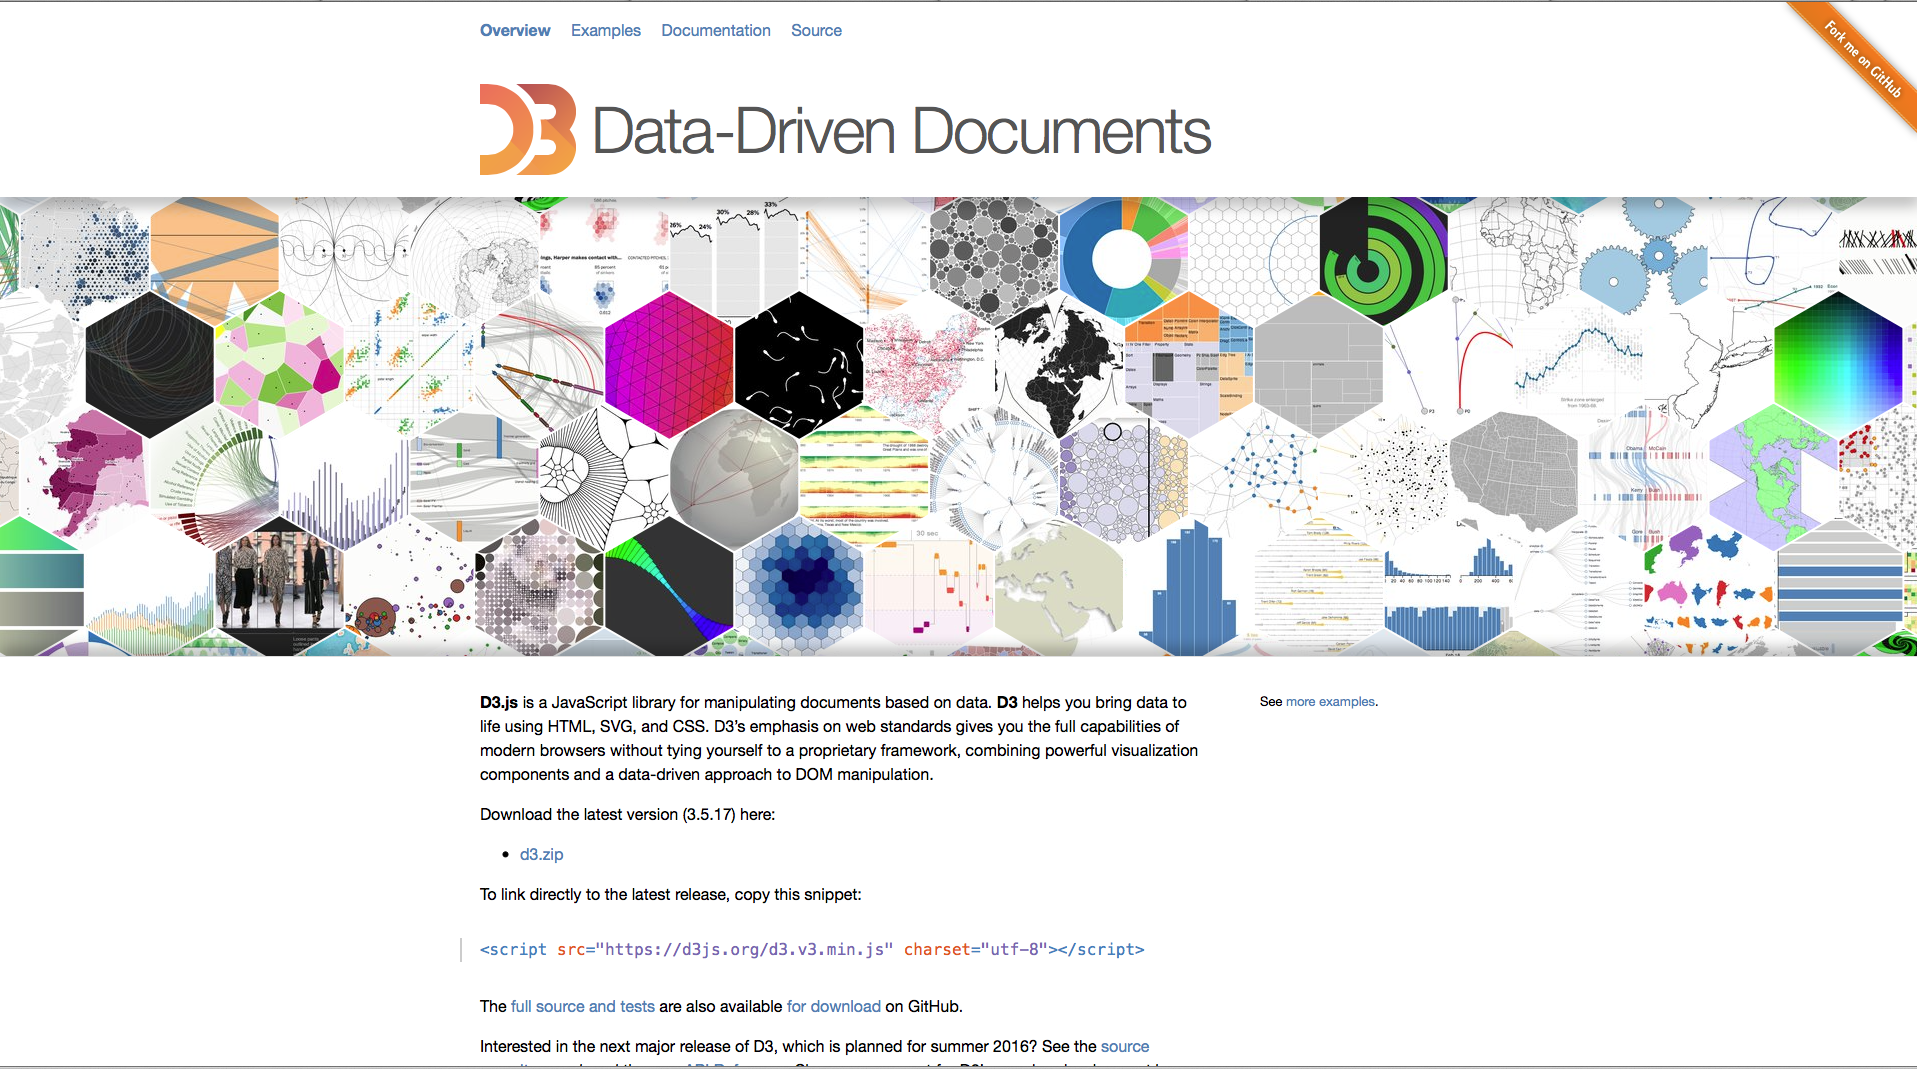 D3.js - Datenvisualisierungs-Tools